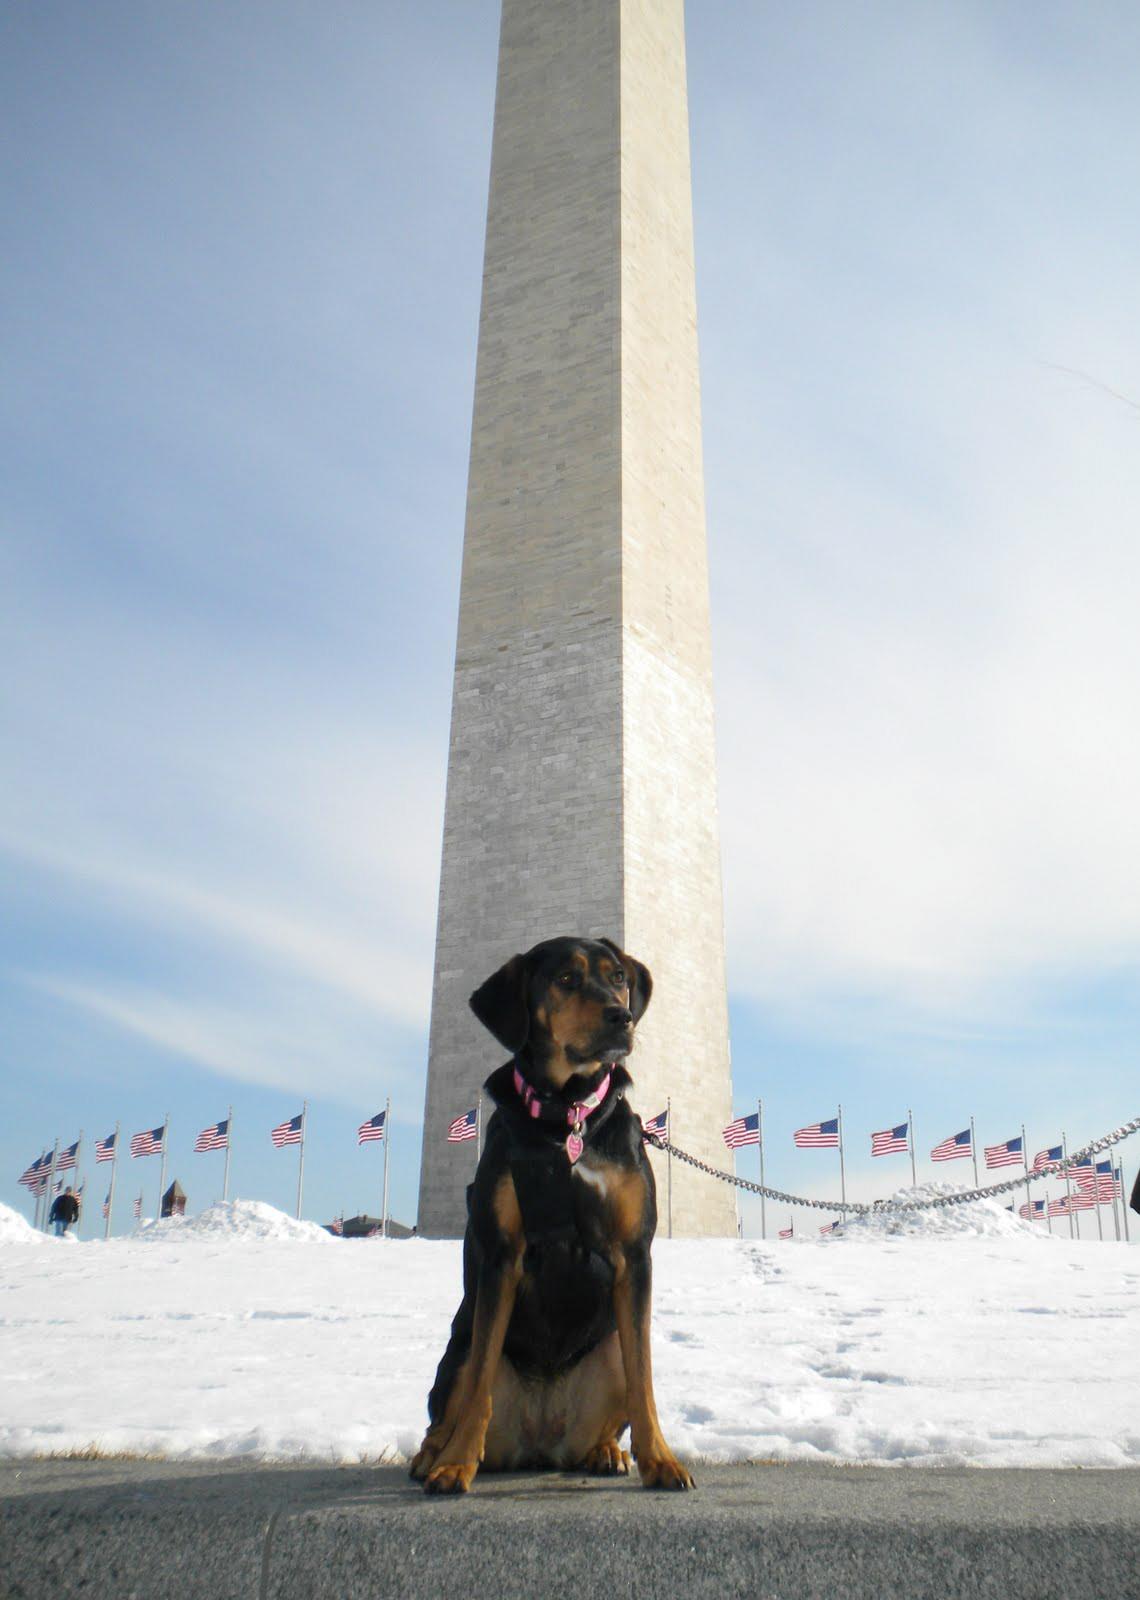 are dogs allowed at the national mall